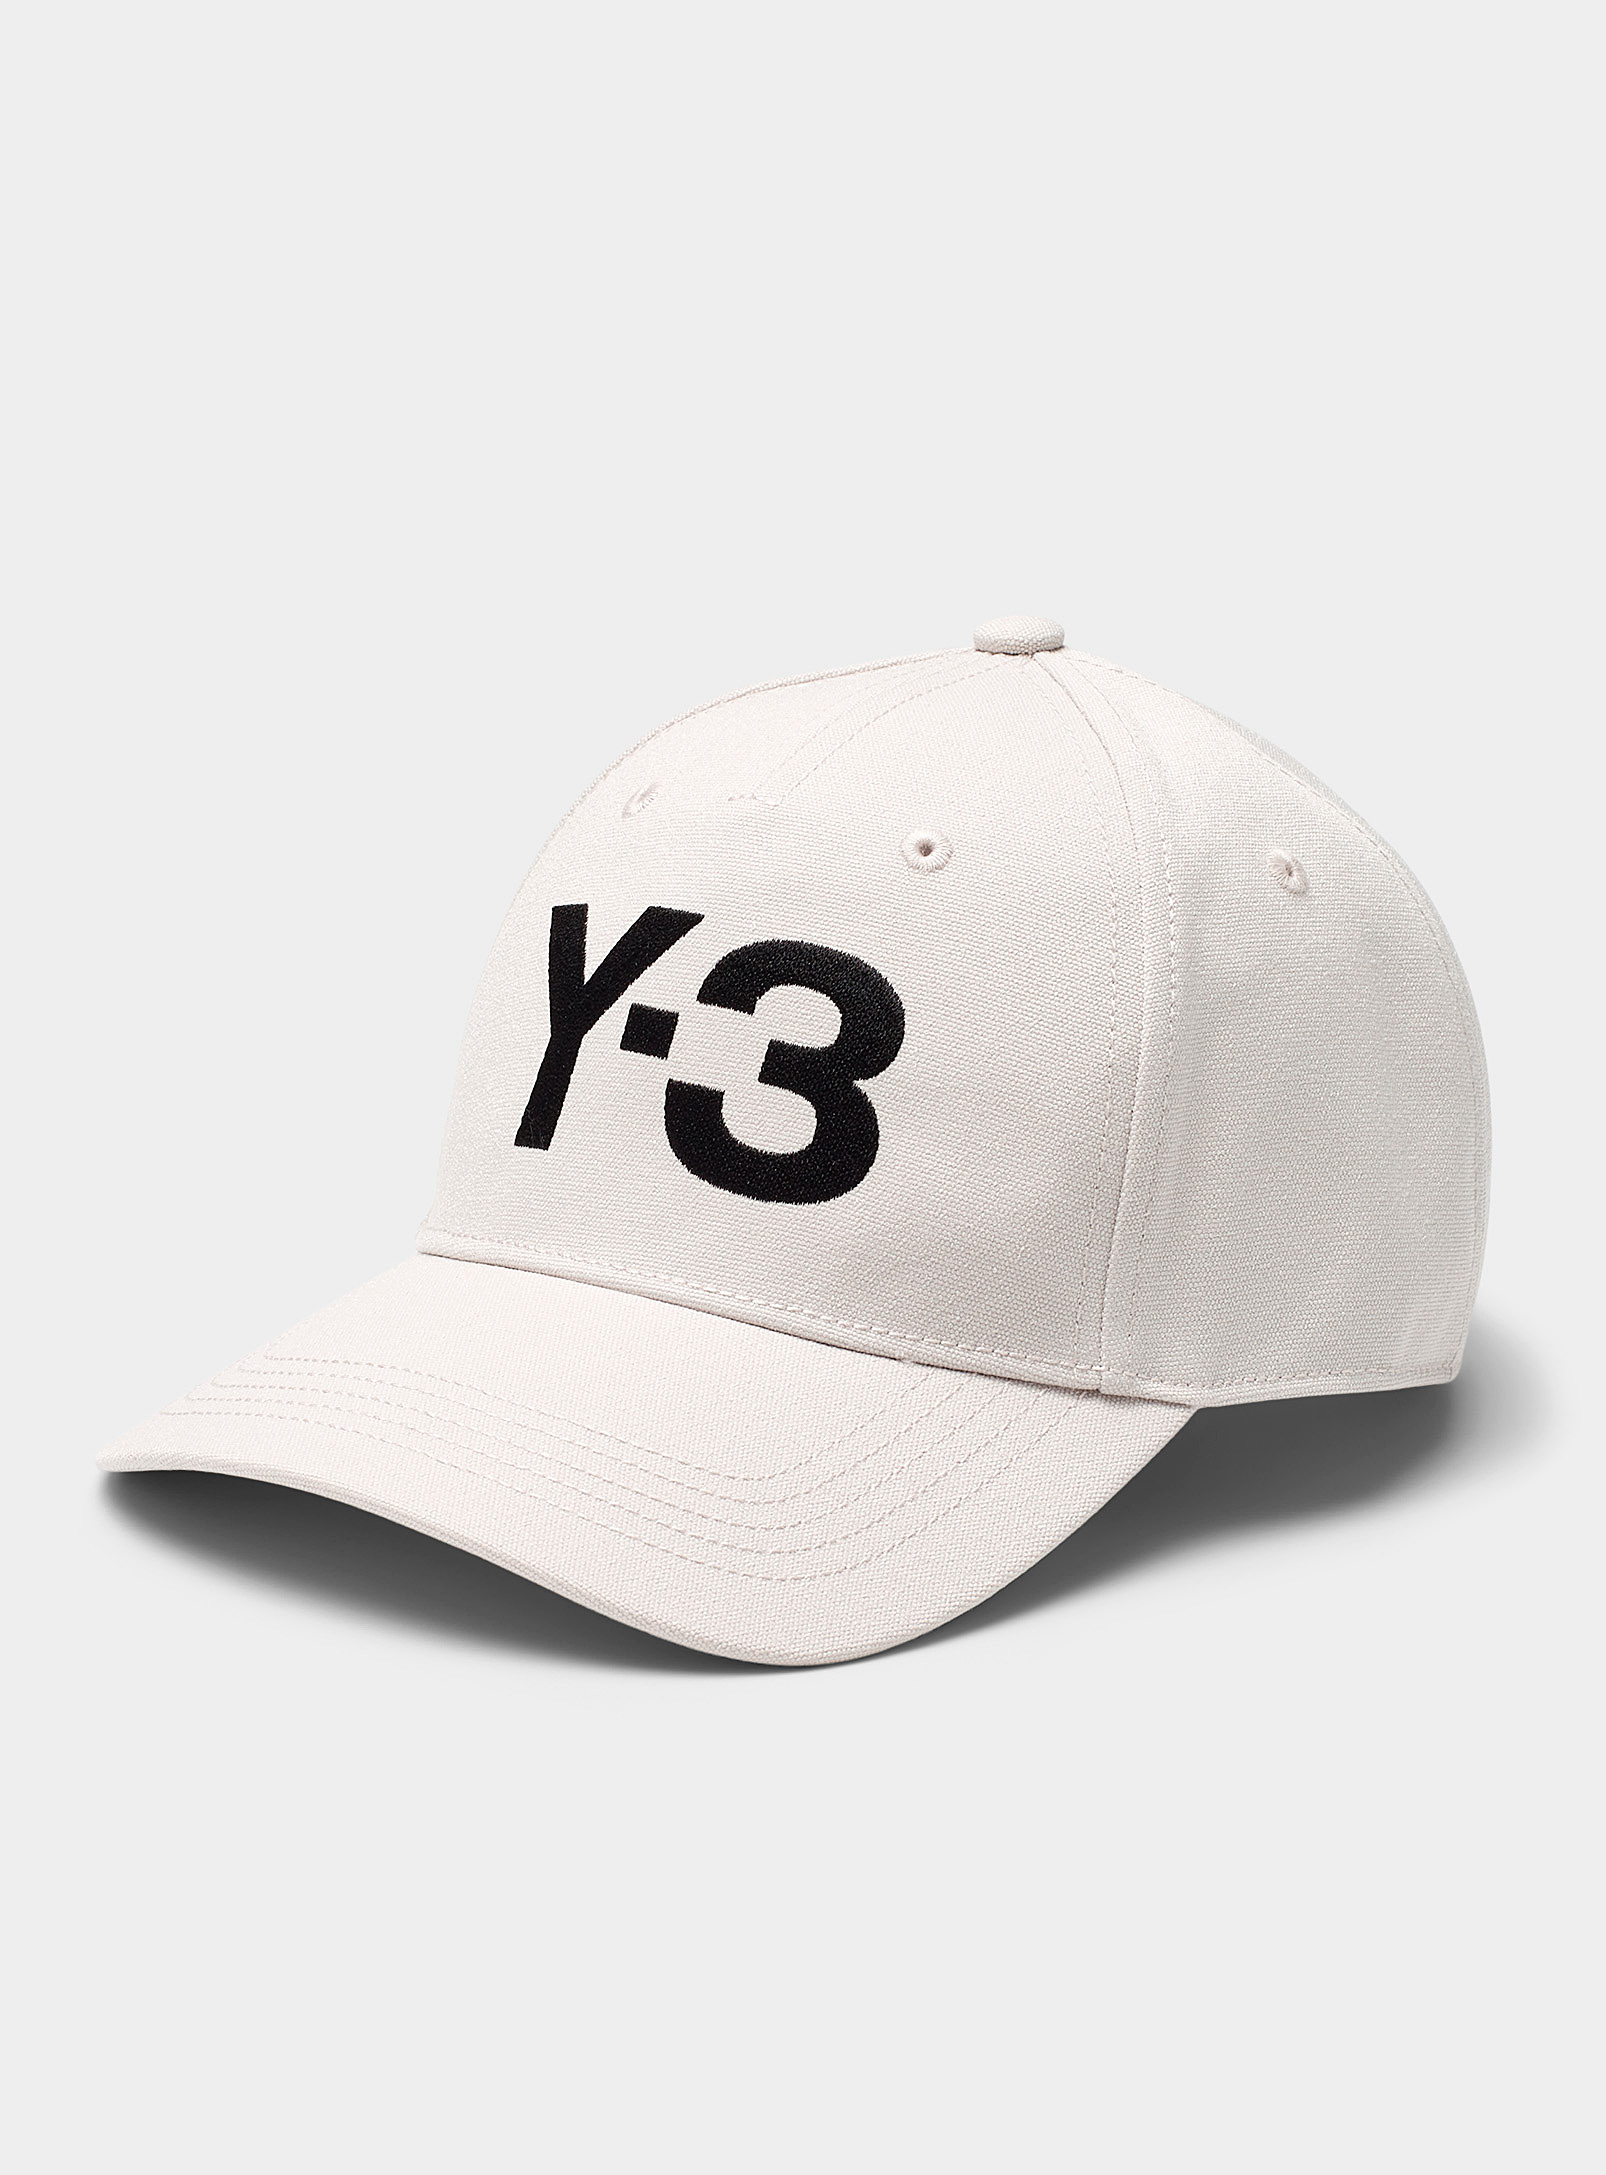 adidas X Y-3 - Men's Oversized embroidery Y-3 off-white baseball cap